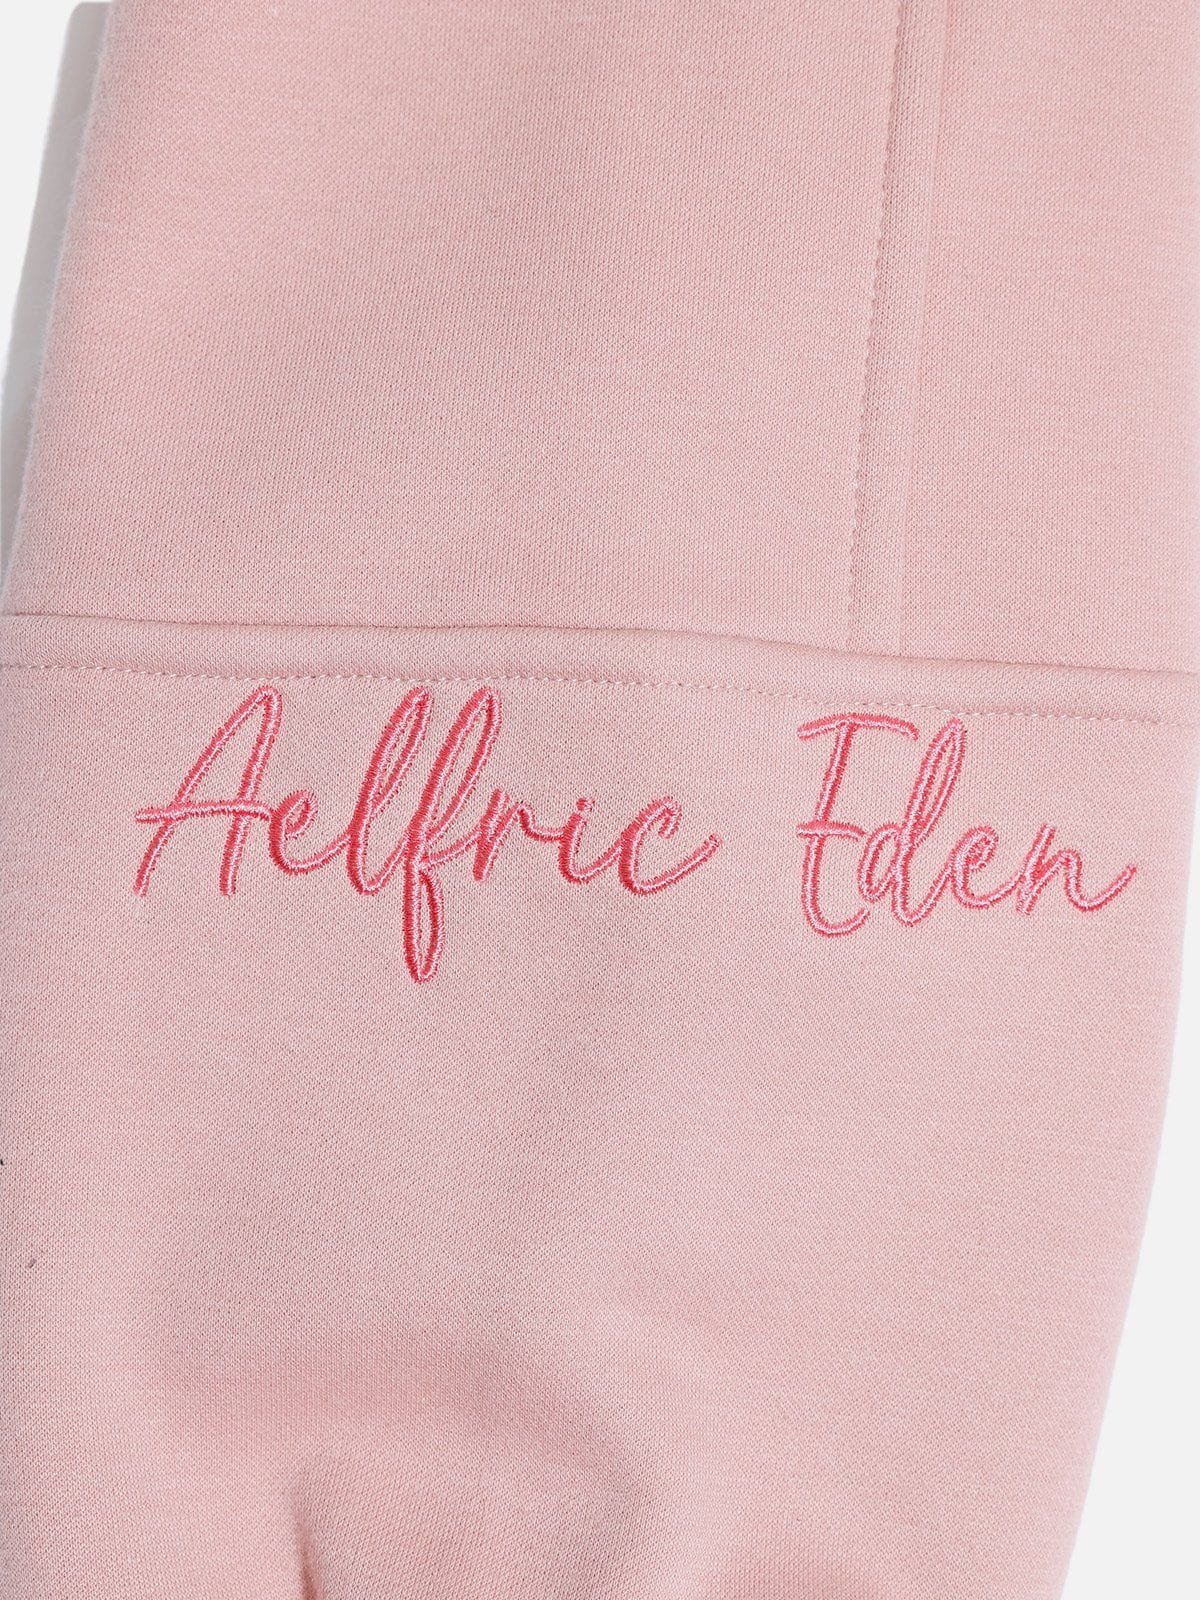 Aelfric Eden Thorny Heart Hoodie<font color=